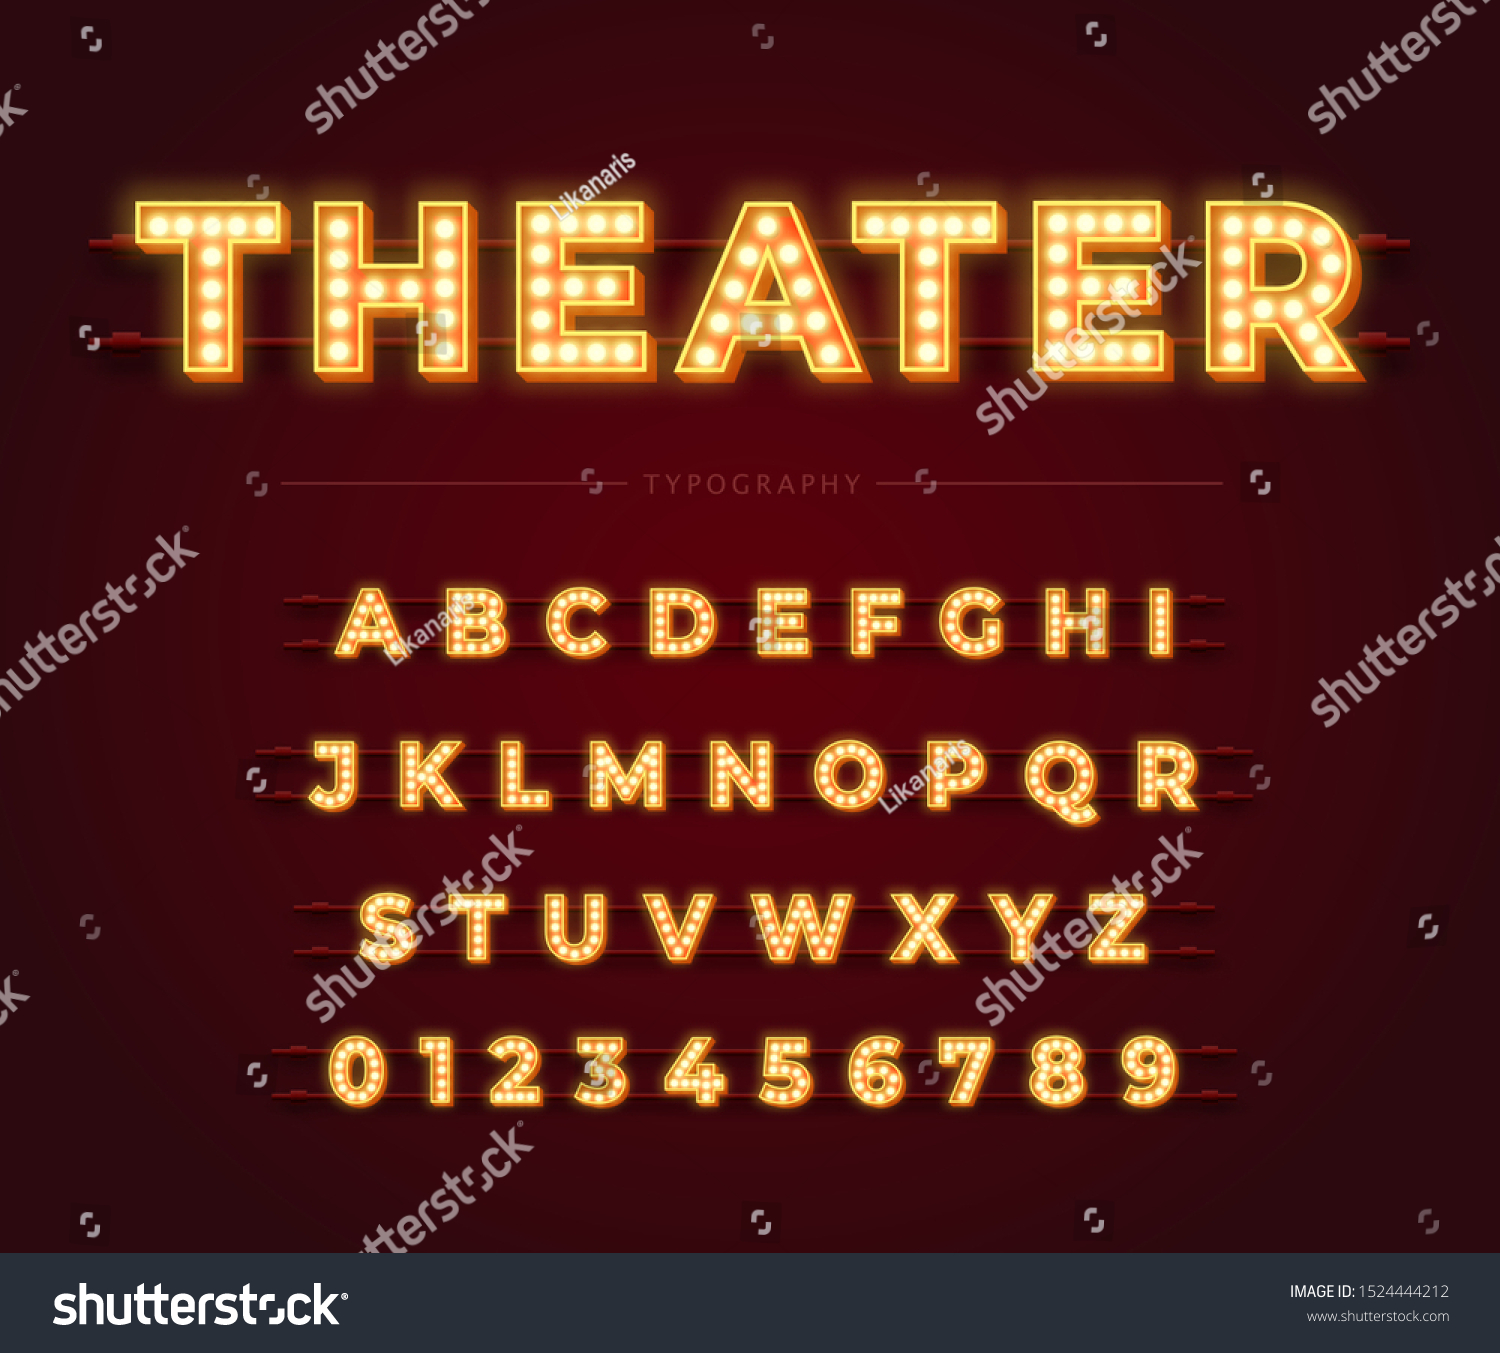 SVG of 3d light bulb alphabet with red frame isolated on dark red background. Theater style retro glowing font. Vector illustration. svg